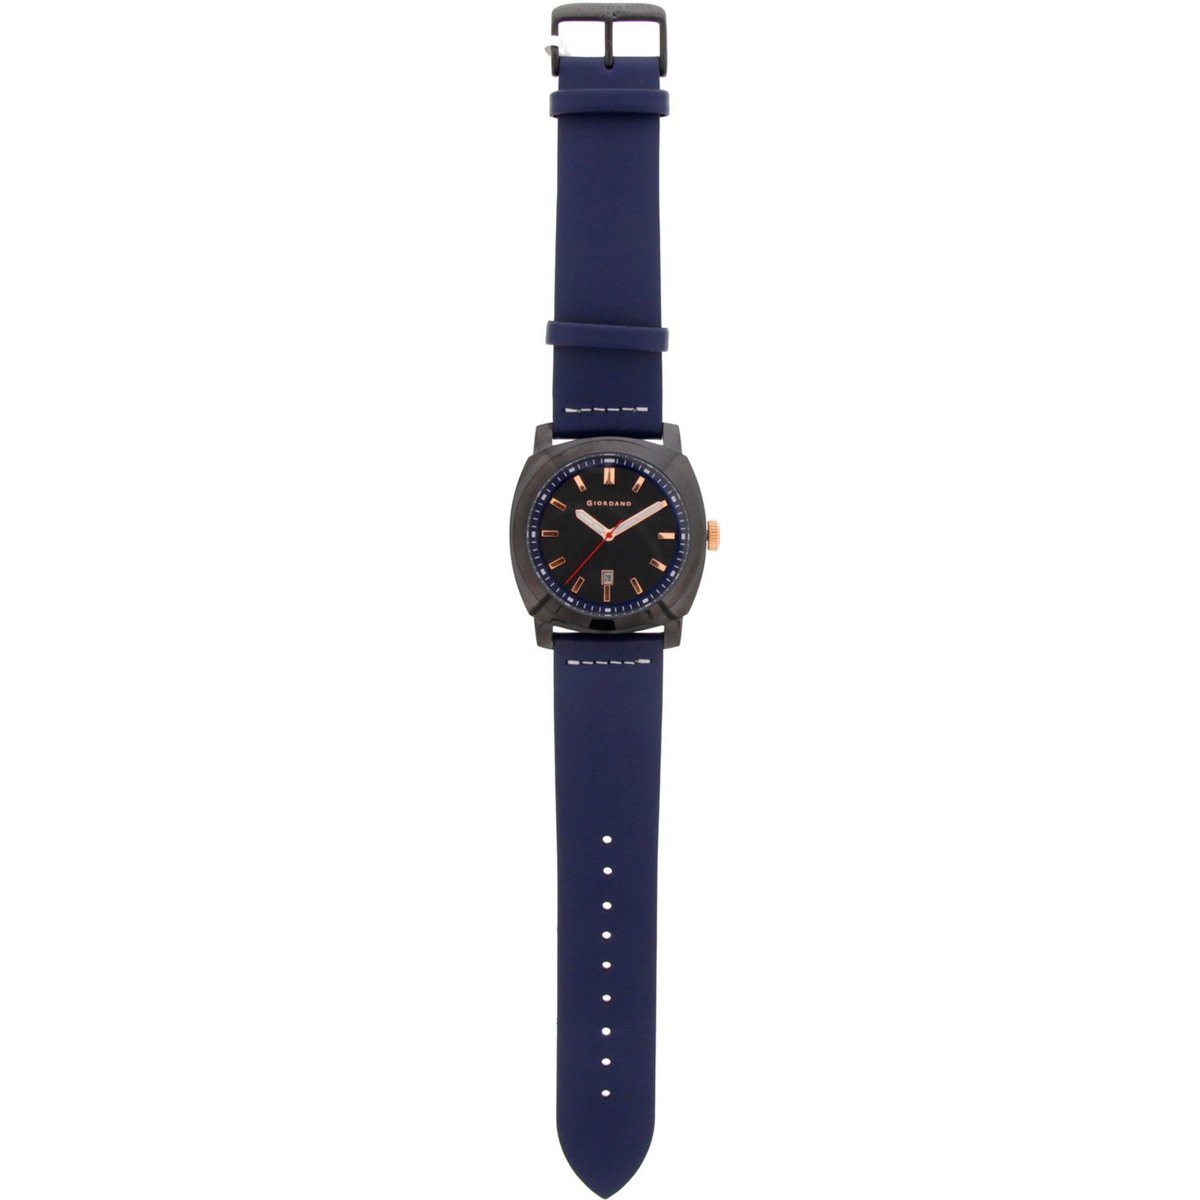 Giordano Men's Analog Watch Blue Strap With Black Dial - 1789-08